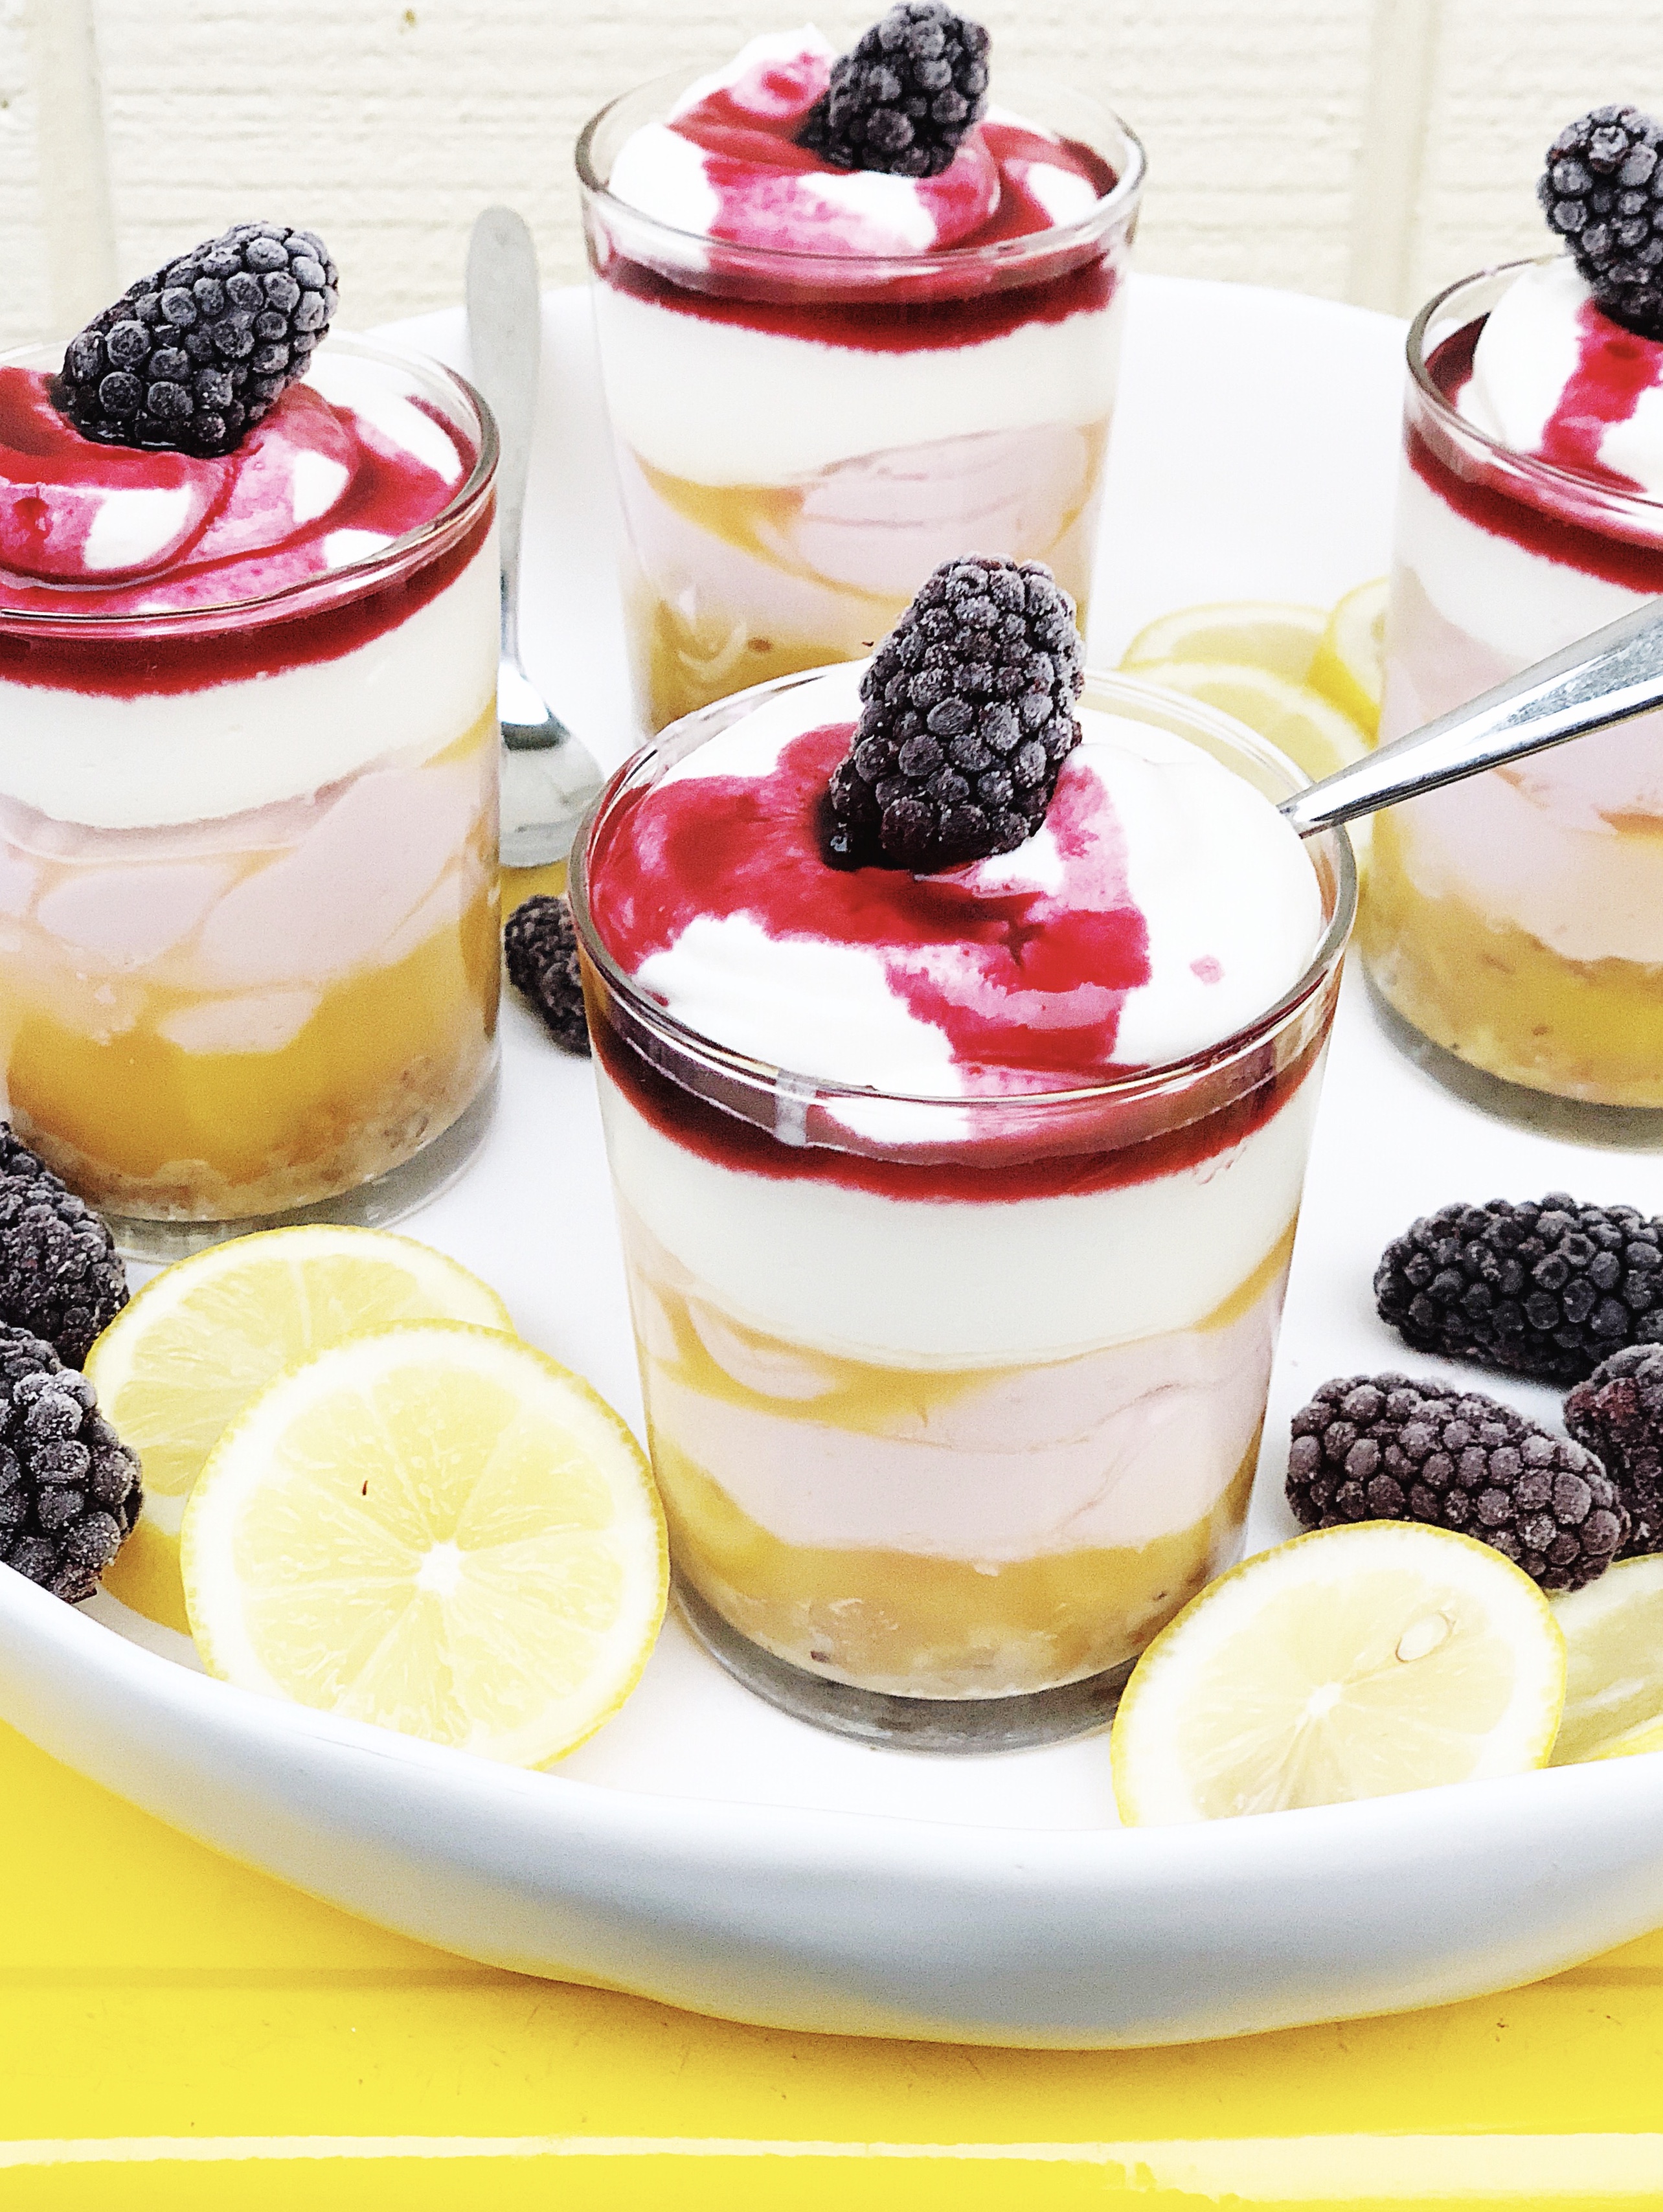 Lemon and Blackberry Cheesecake No-Bake Dessert | A Well Crafted Party